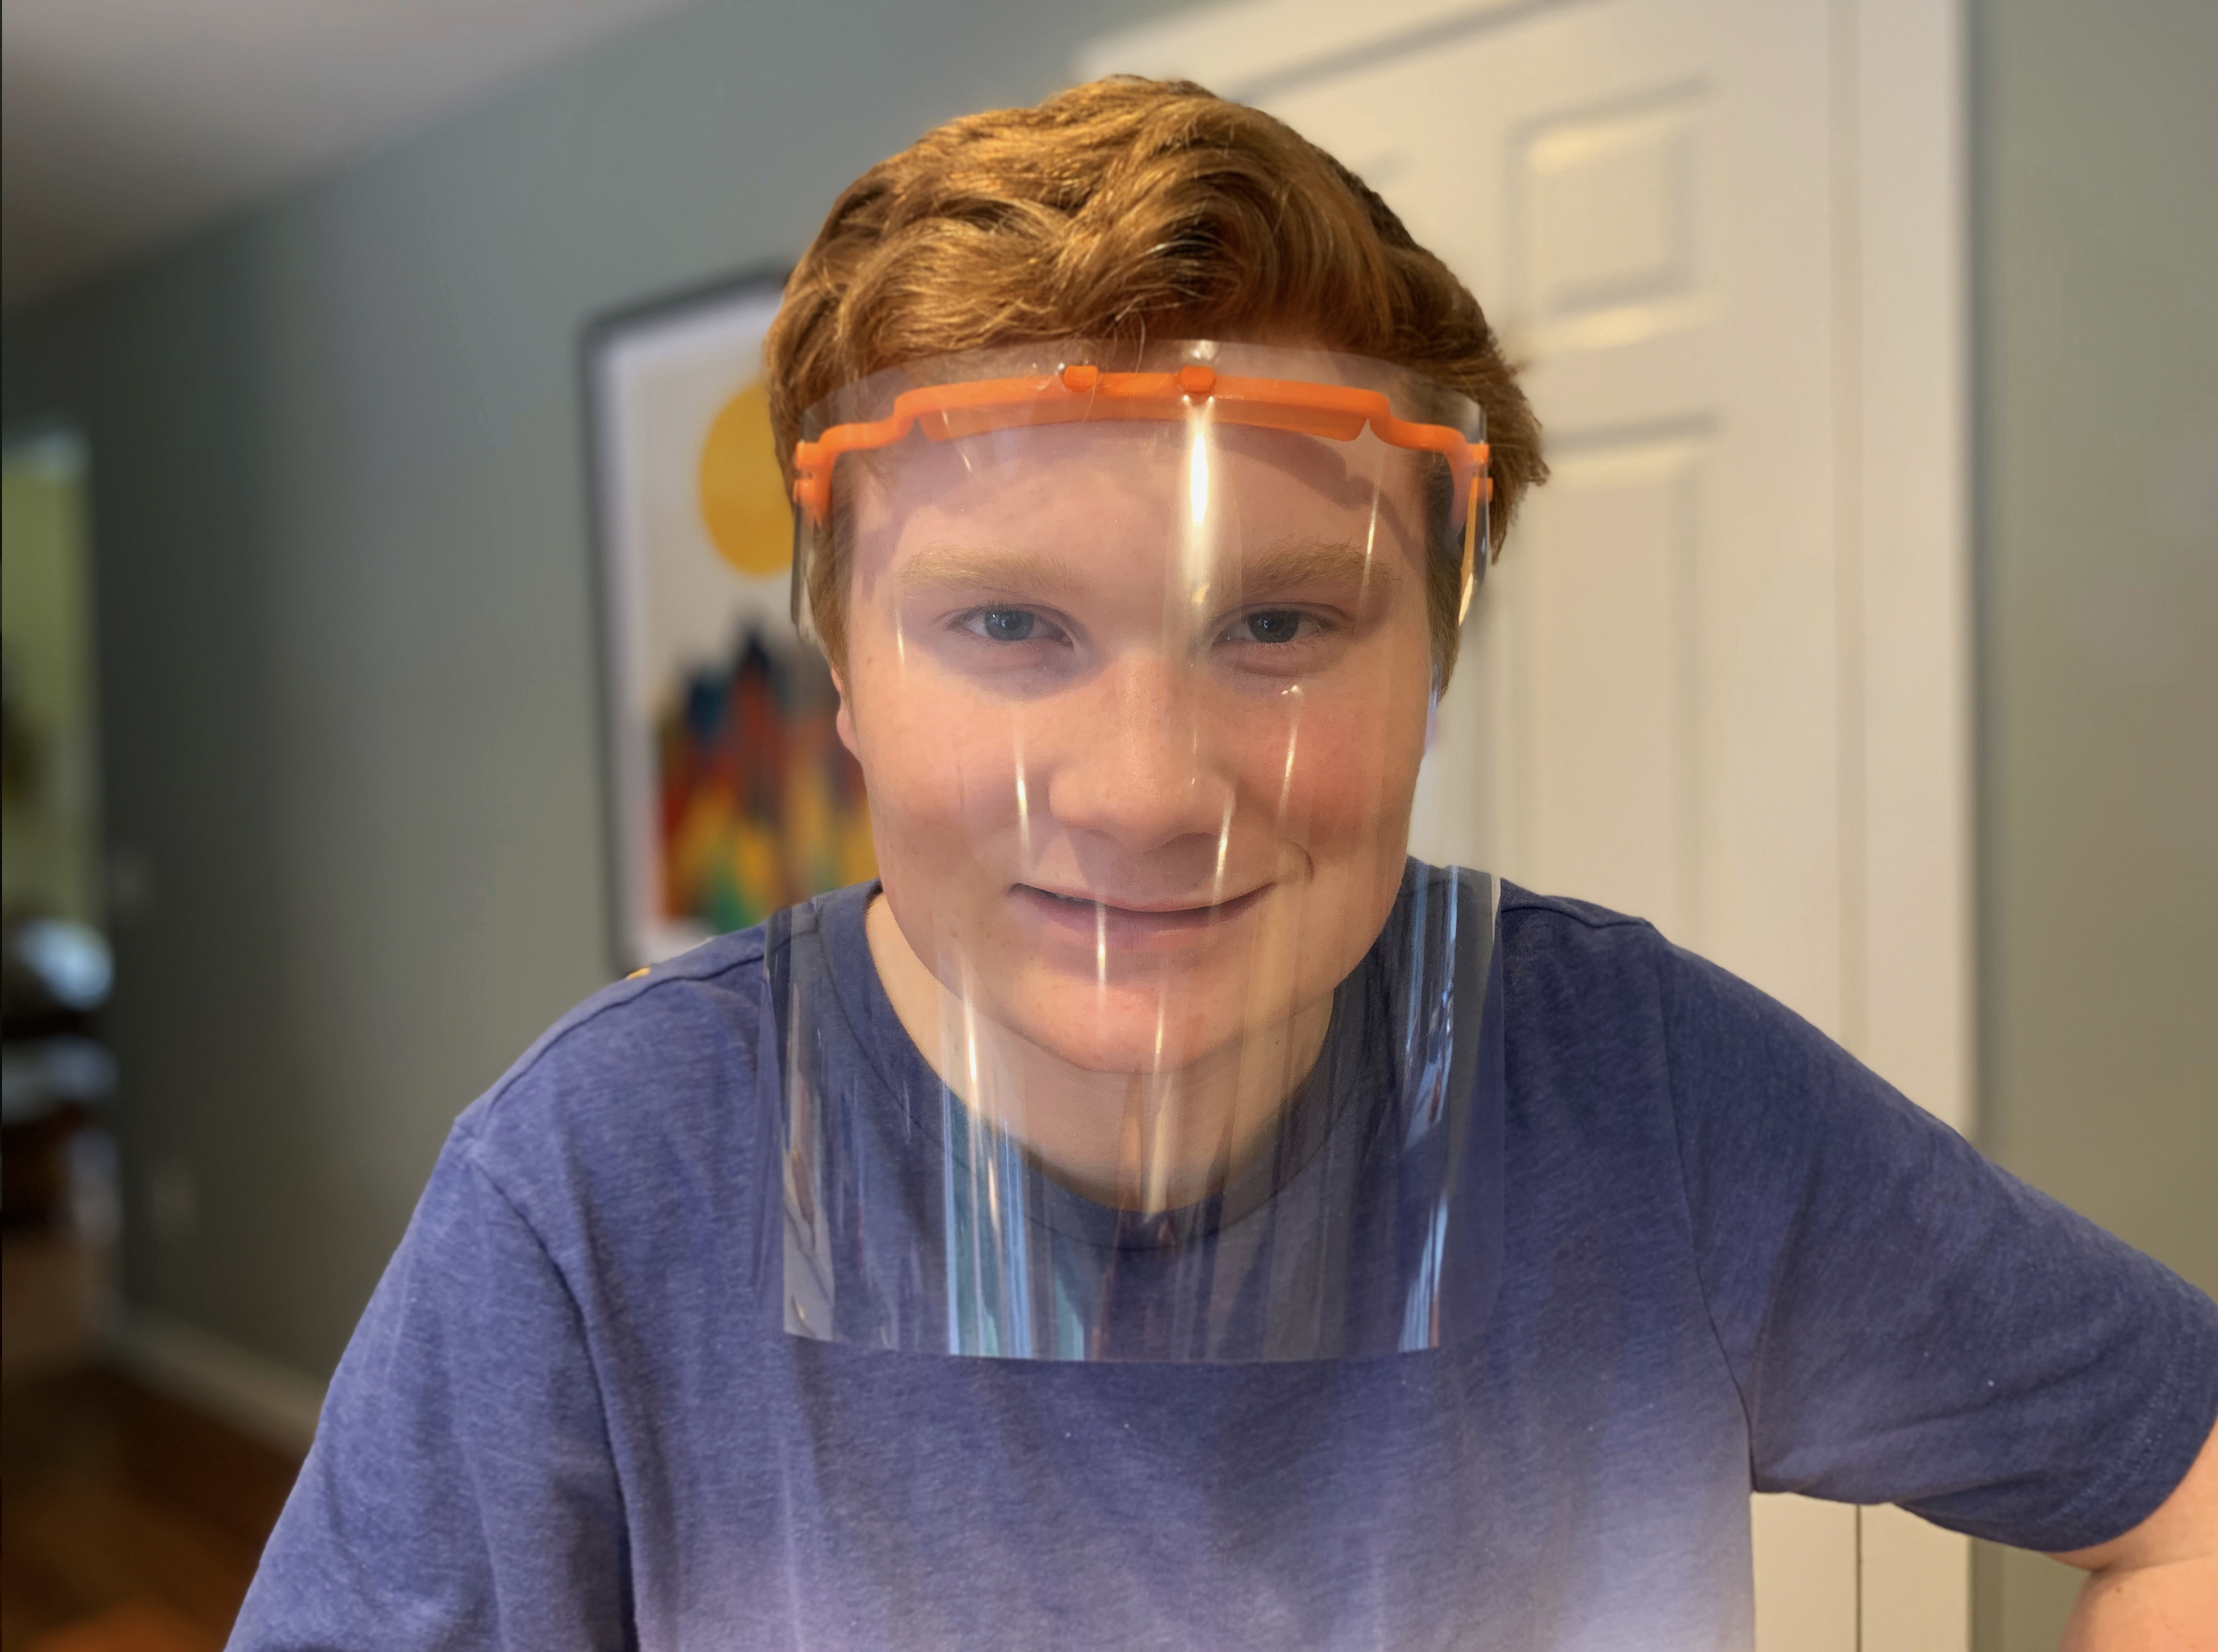 Noah Schwartz with 3D printed headband and face shield.